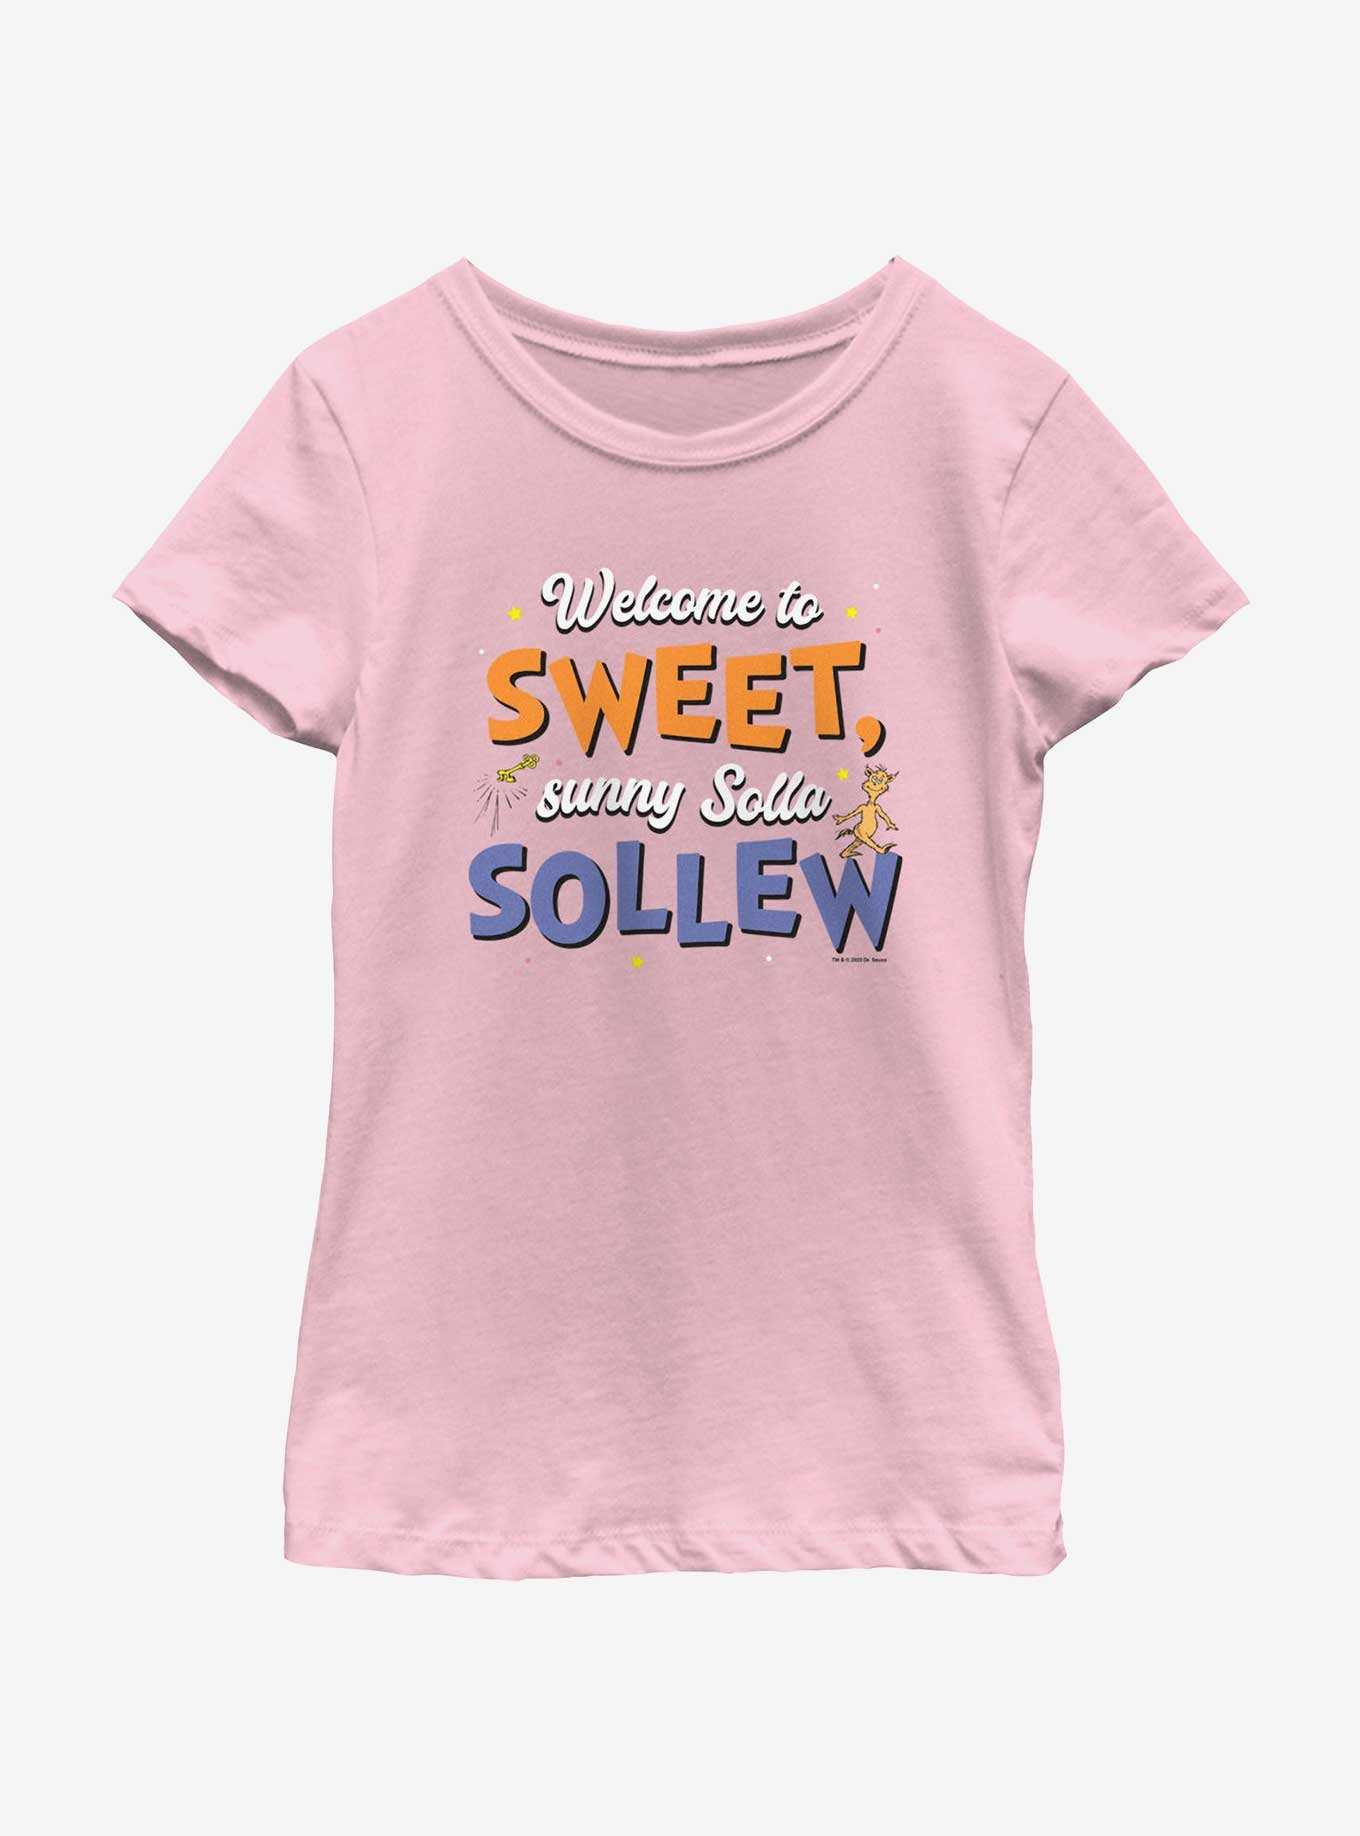 Dr. Seuss's I Had Trouble Getting Into Solla Sollew Welcome To Sweet Sunny Solla Sollew Youth Girls T-Shirt, , hi-res